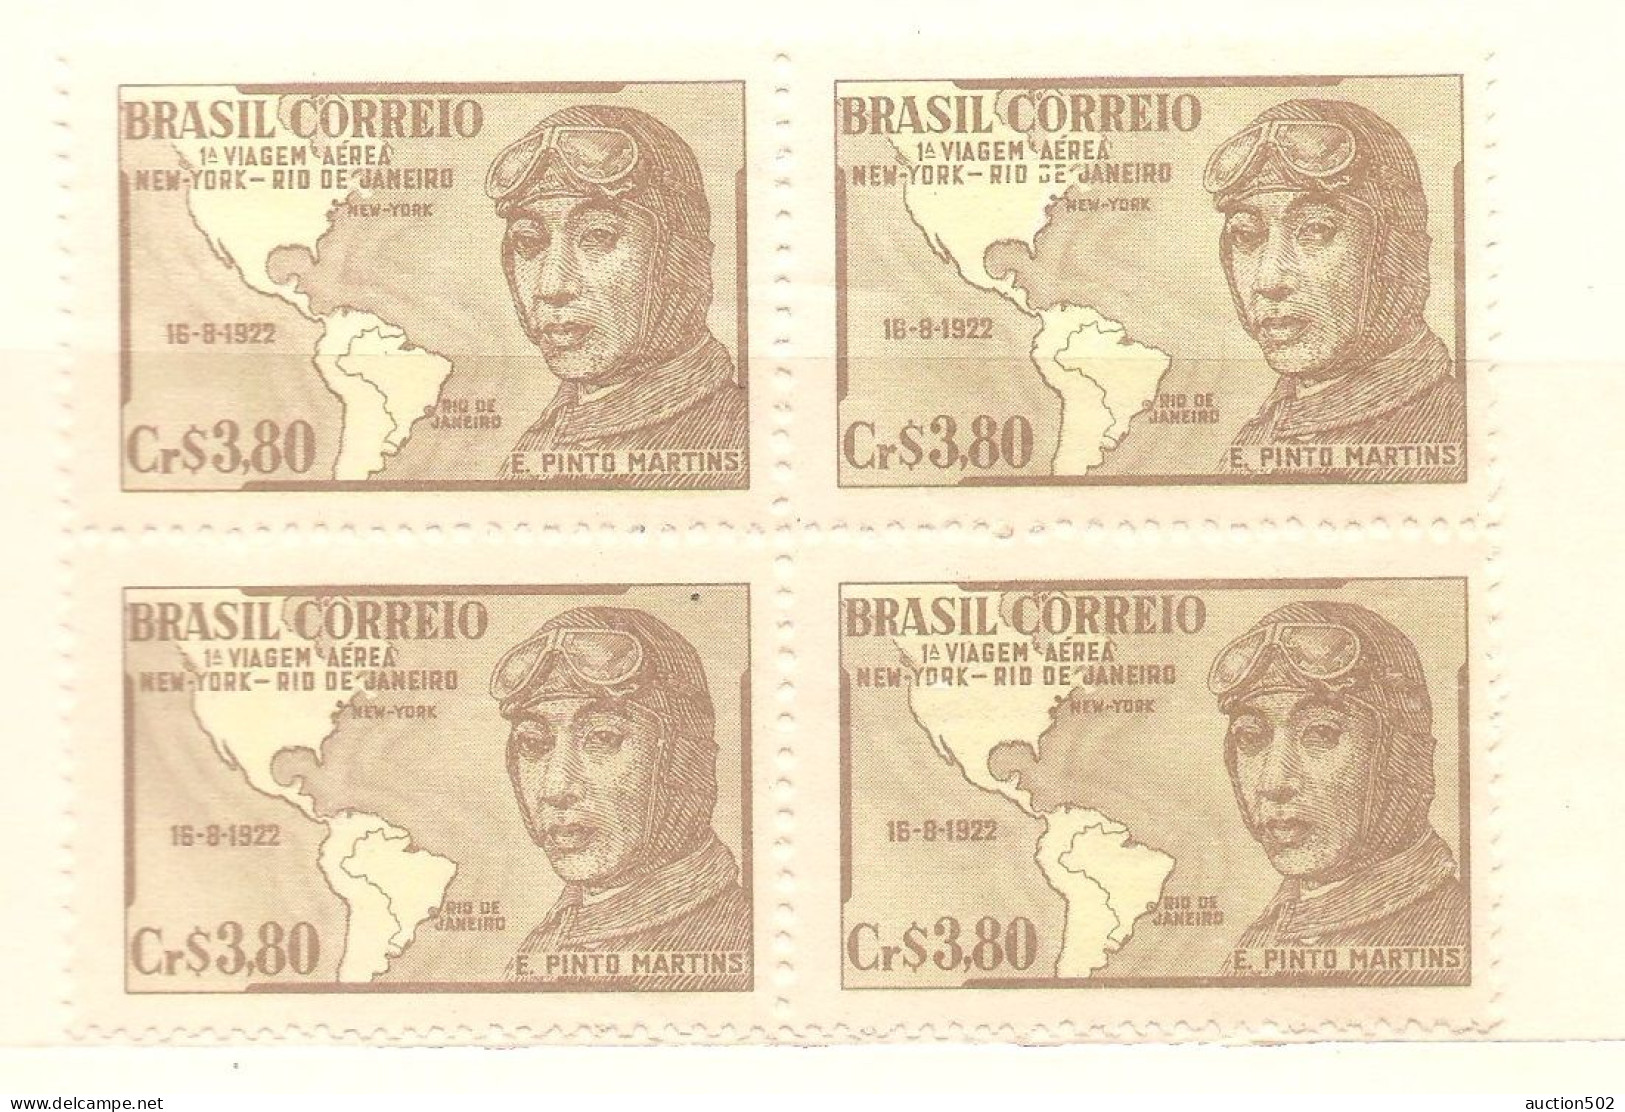 Brazil Stamps year 1952 block of 4 **